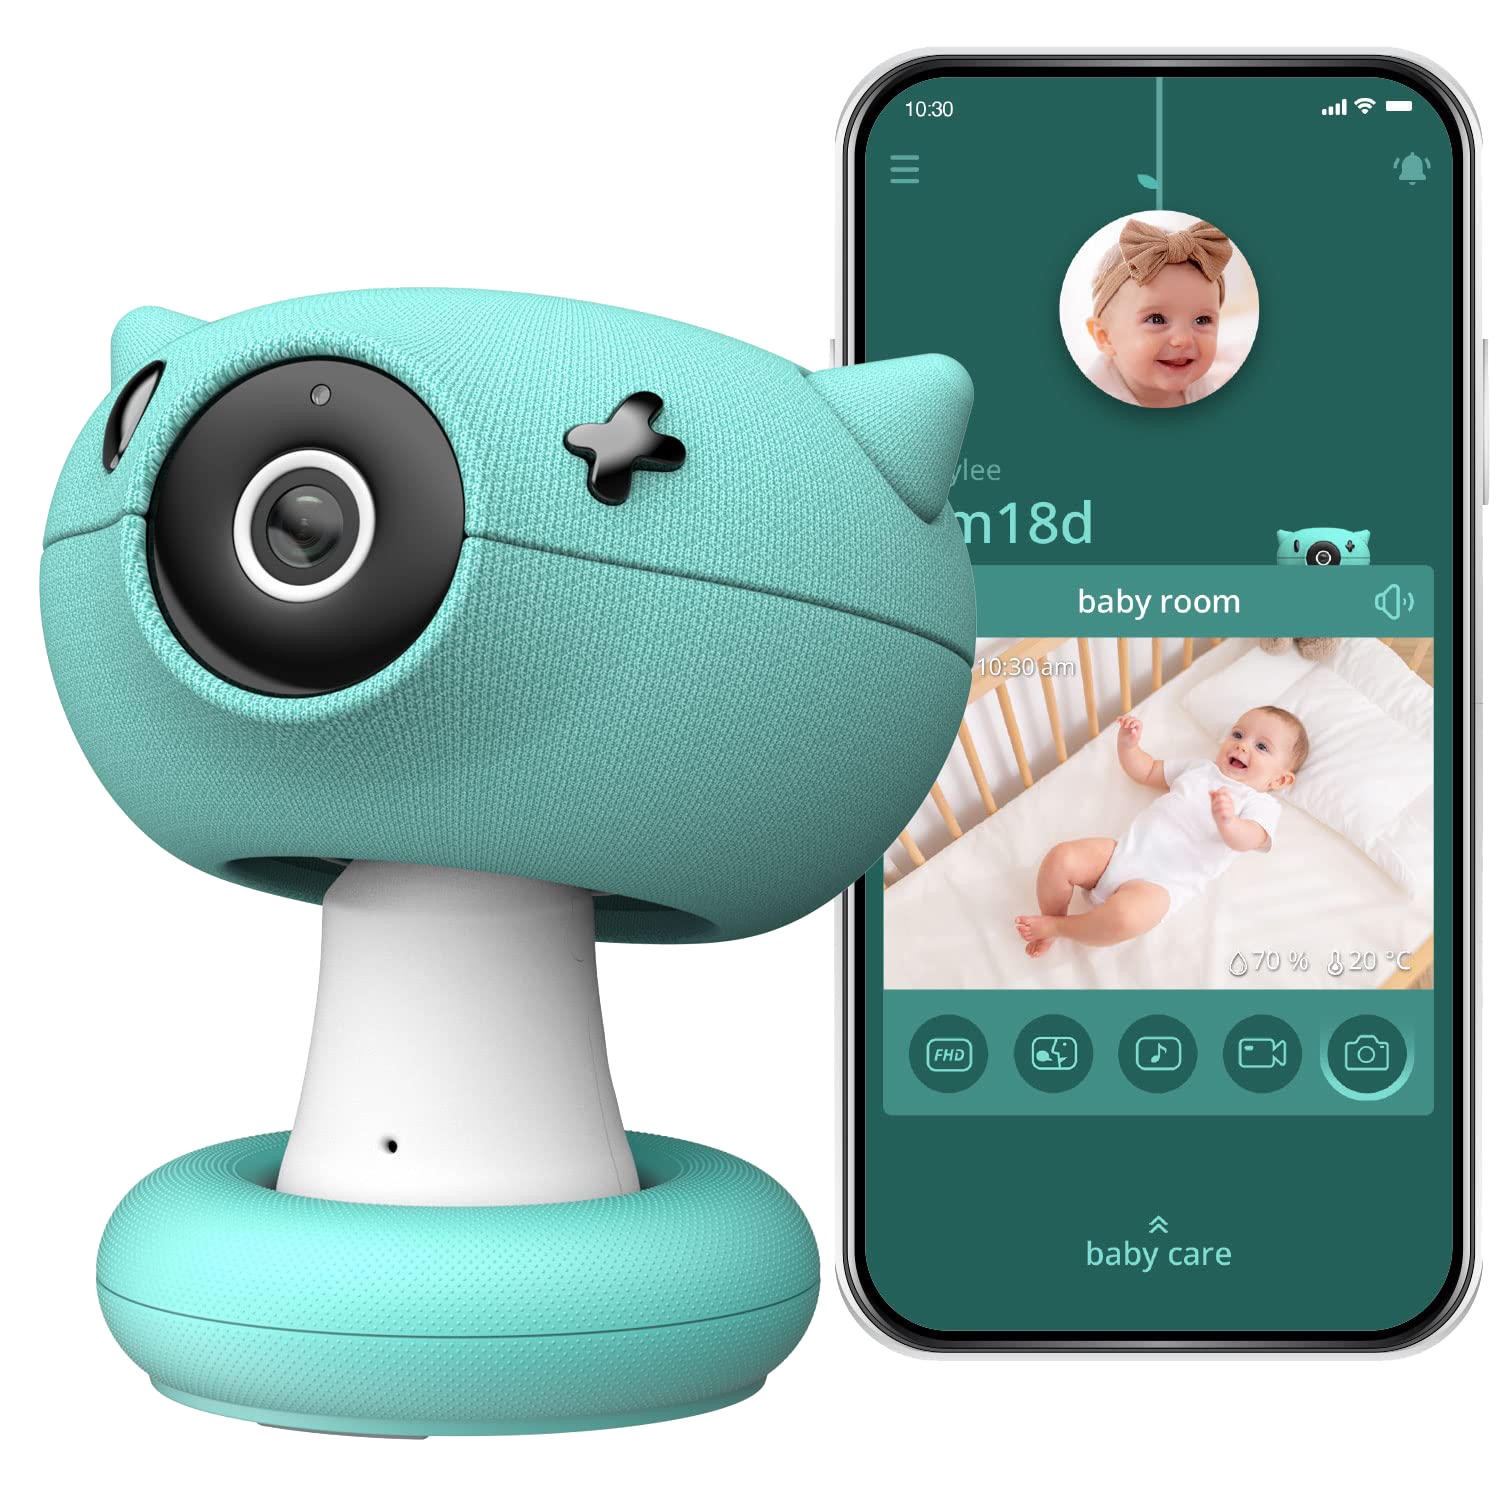 Pixsee Smart Video Baby Monitor, Full HD Camera and Audio with Night Vision